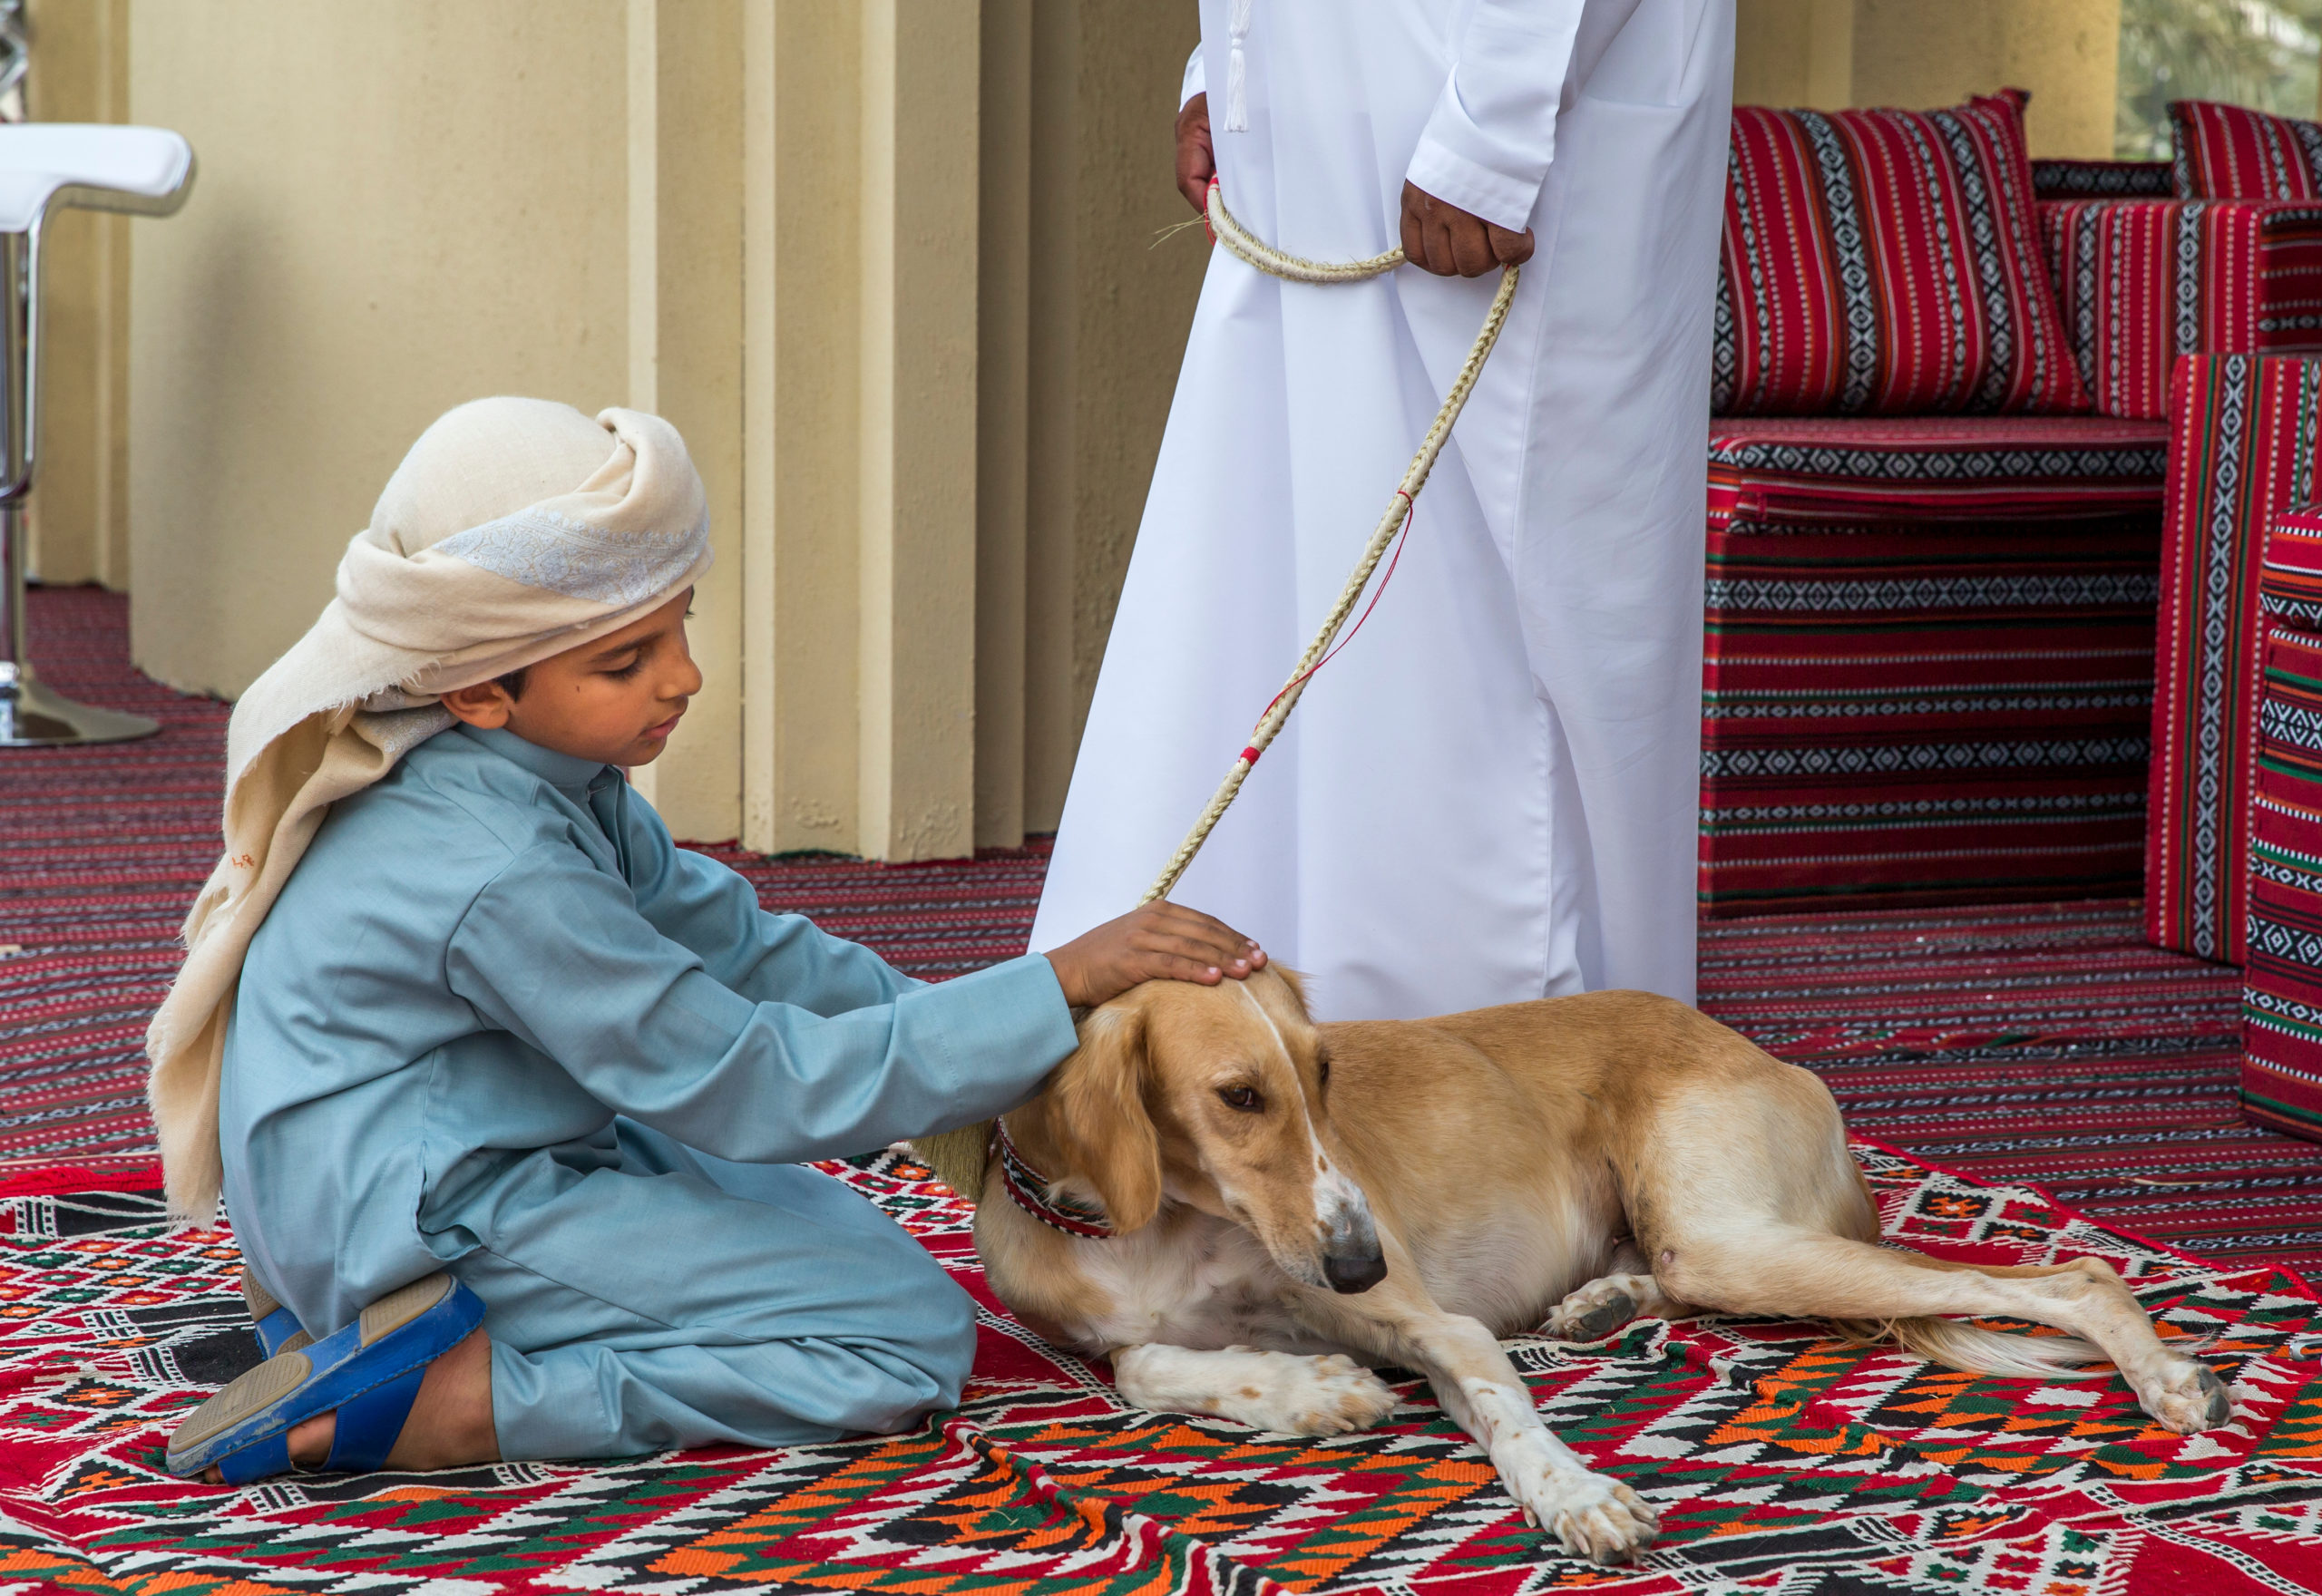 Fast and clever, the Saluki, an Arab dog breed, has been a hunting and guard dog for desert people in the Arabian Peninsula for 5,000 years.